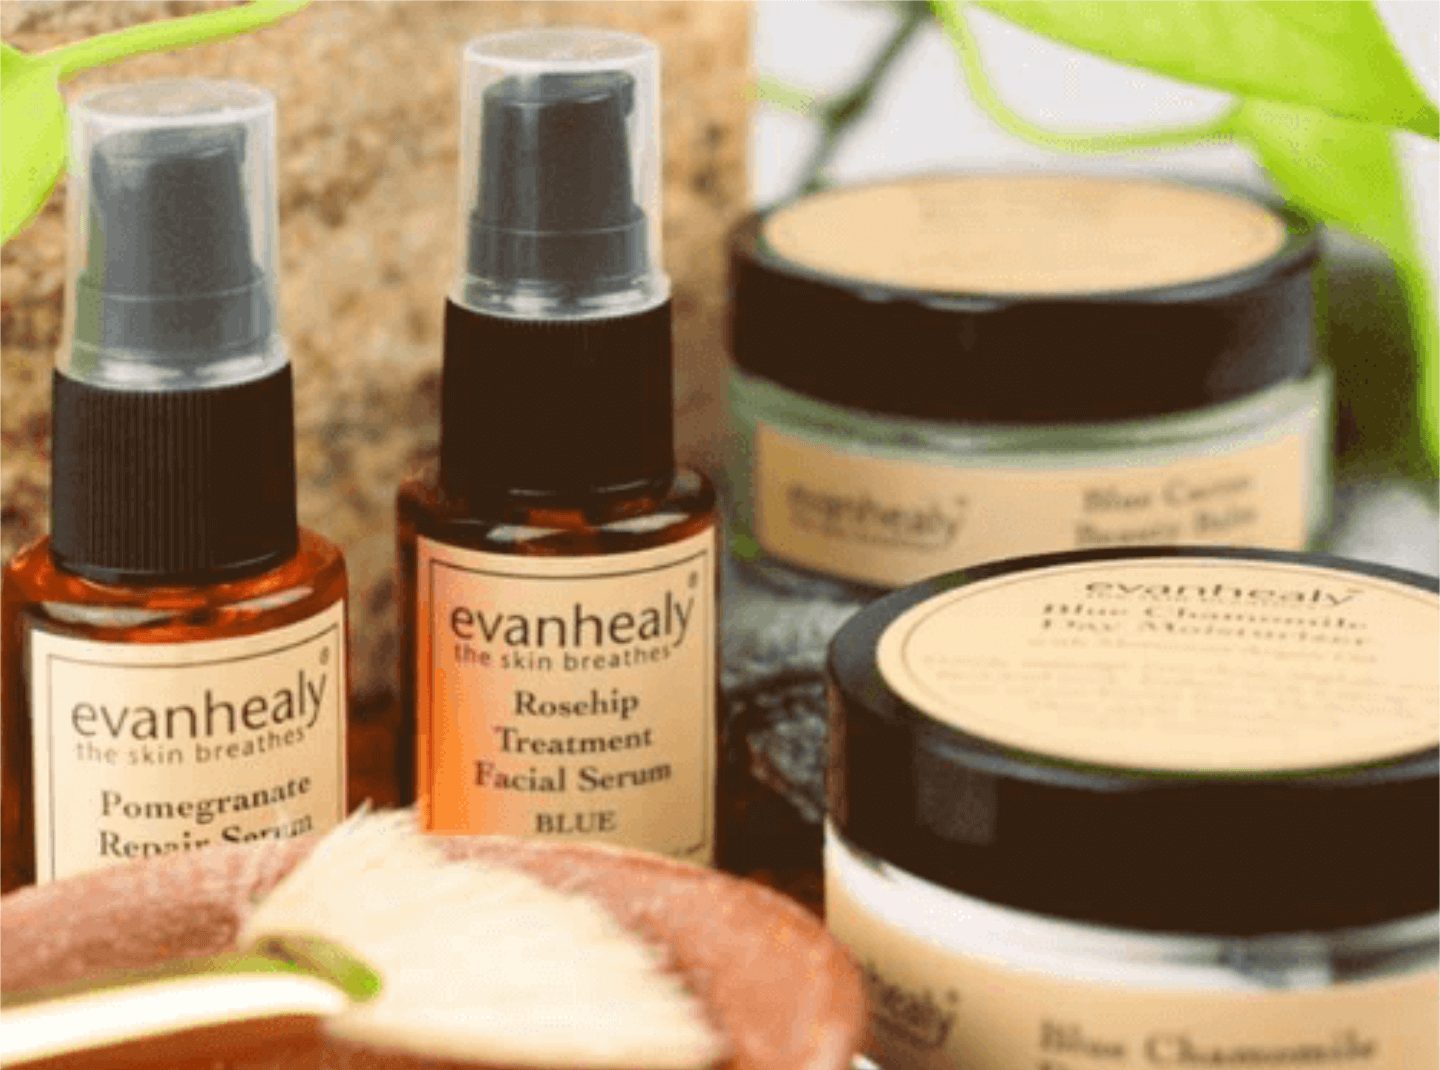 image of evanhealy products